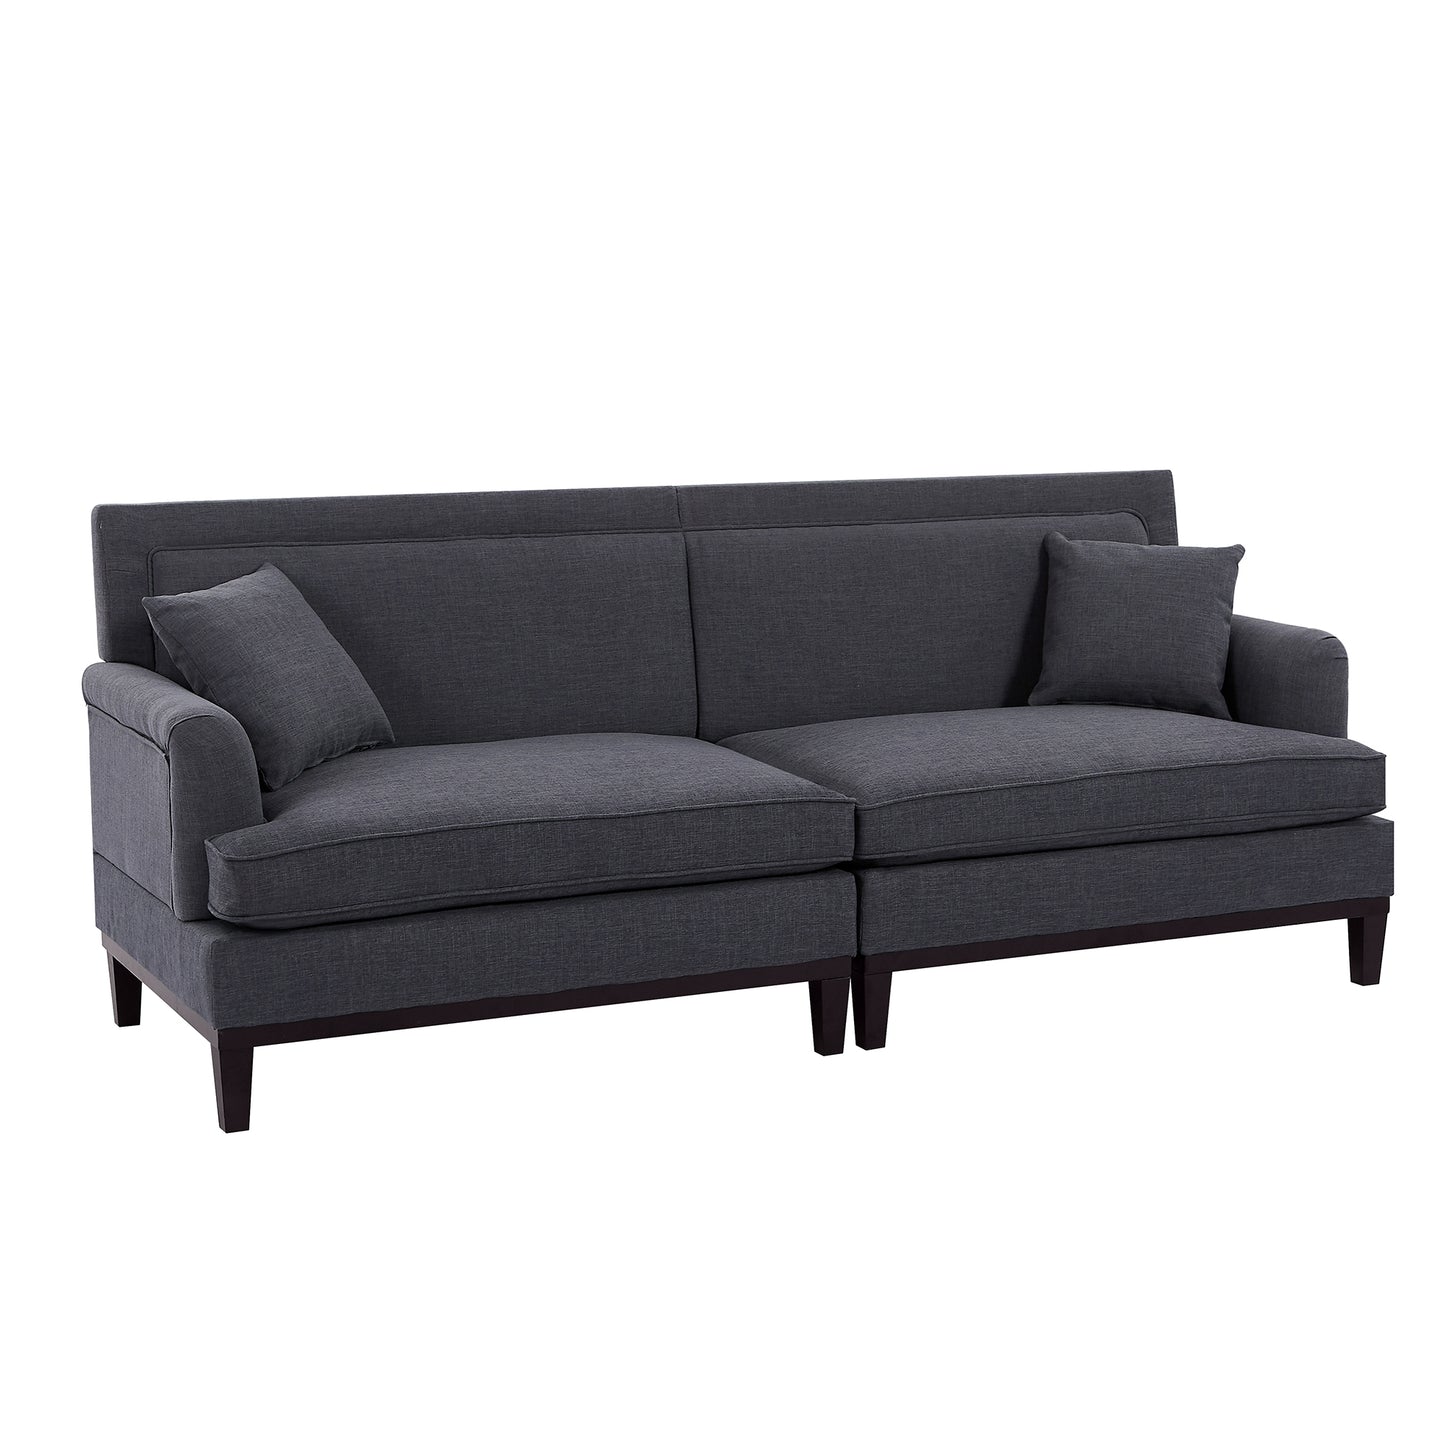 Grey Upholstered Modern Sofa with Wooden Legs and Two Throw Pillows